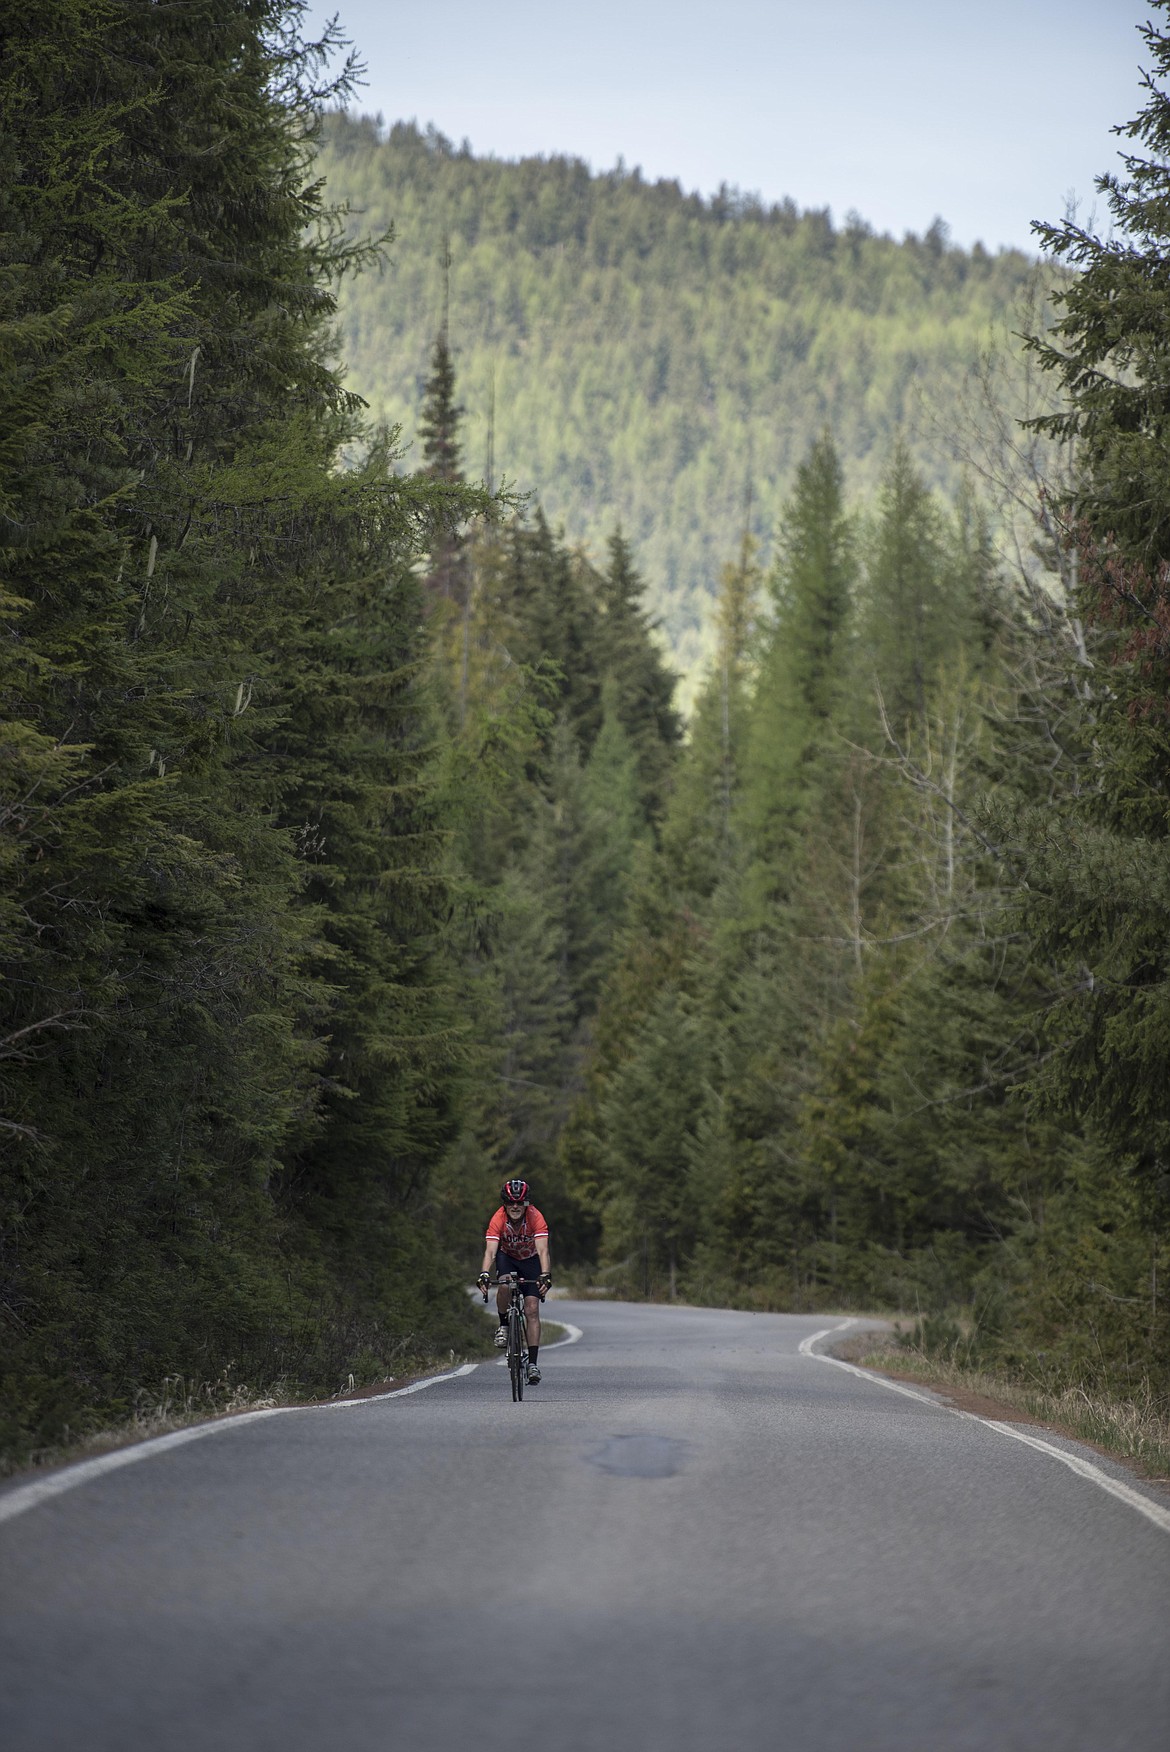 A bicyclist speeds down Pipe Creek Road at the Scenic Tour of the Kootenai River fundraising event, Saturday. (Luke Hollister/The Western News)